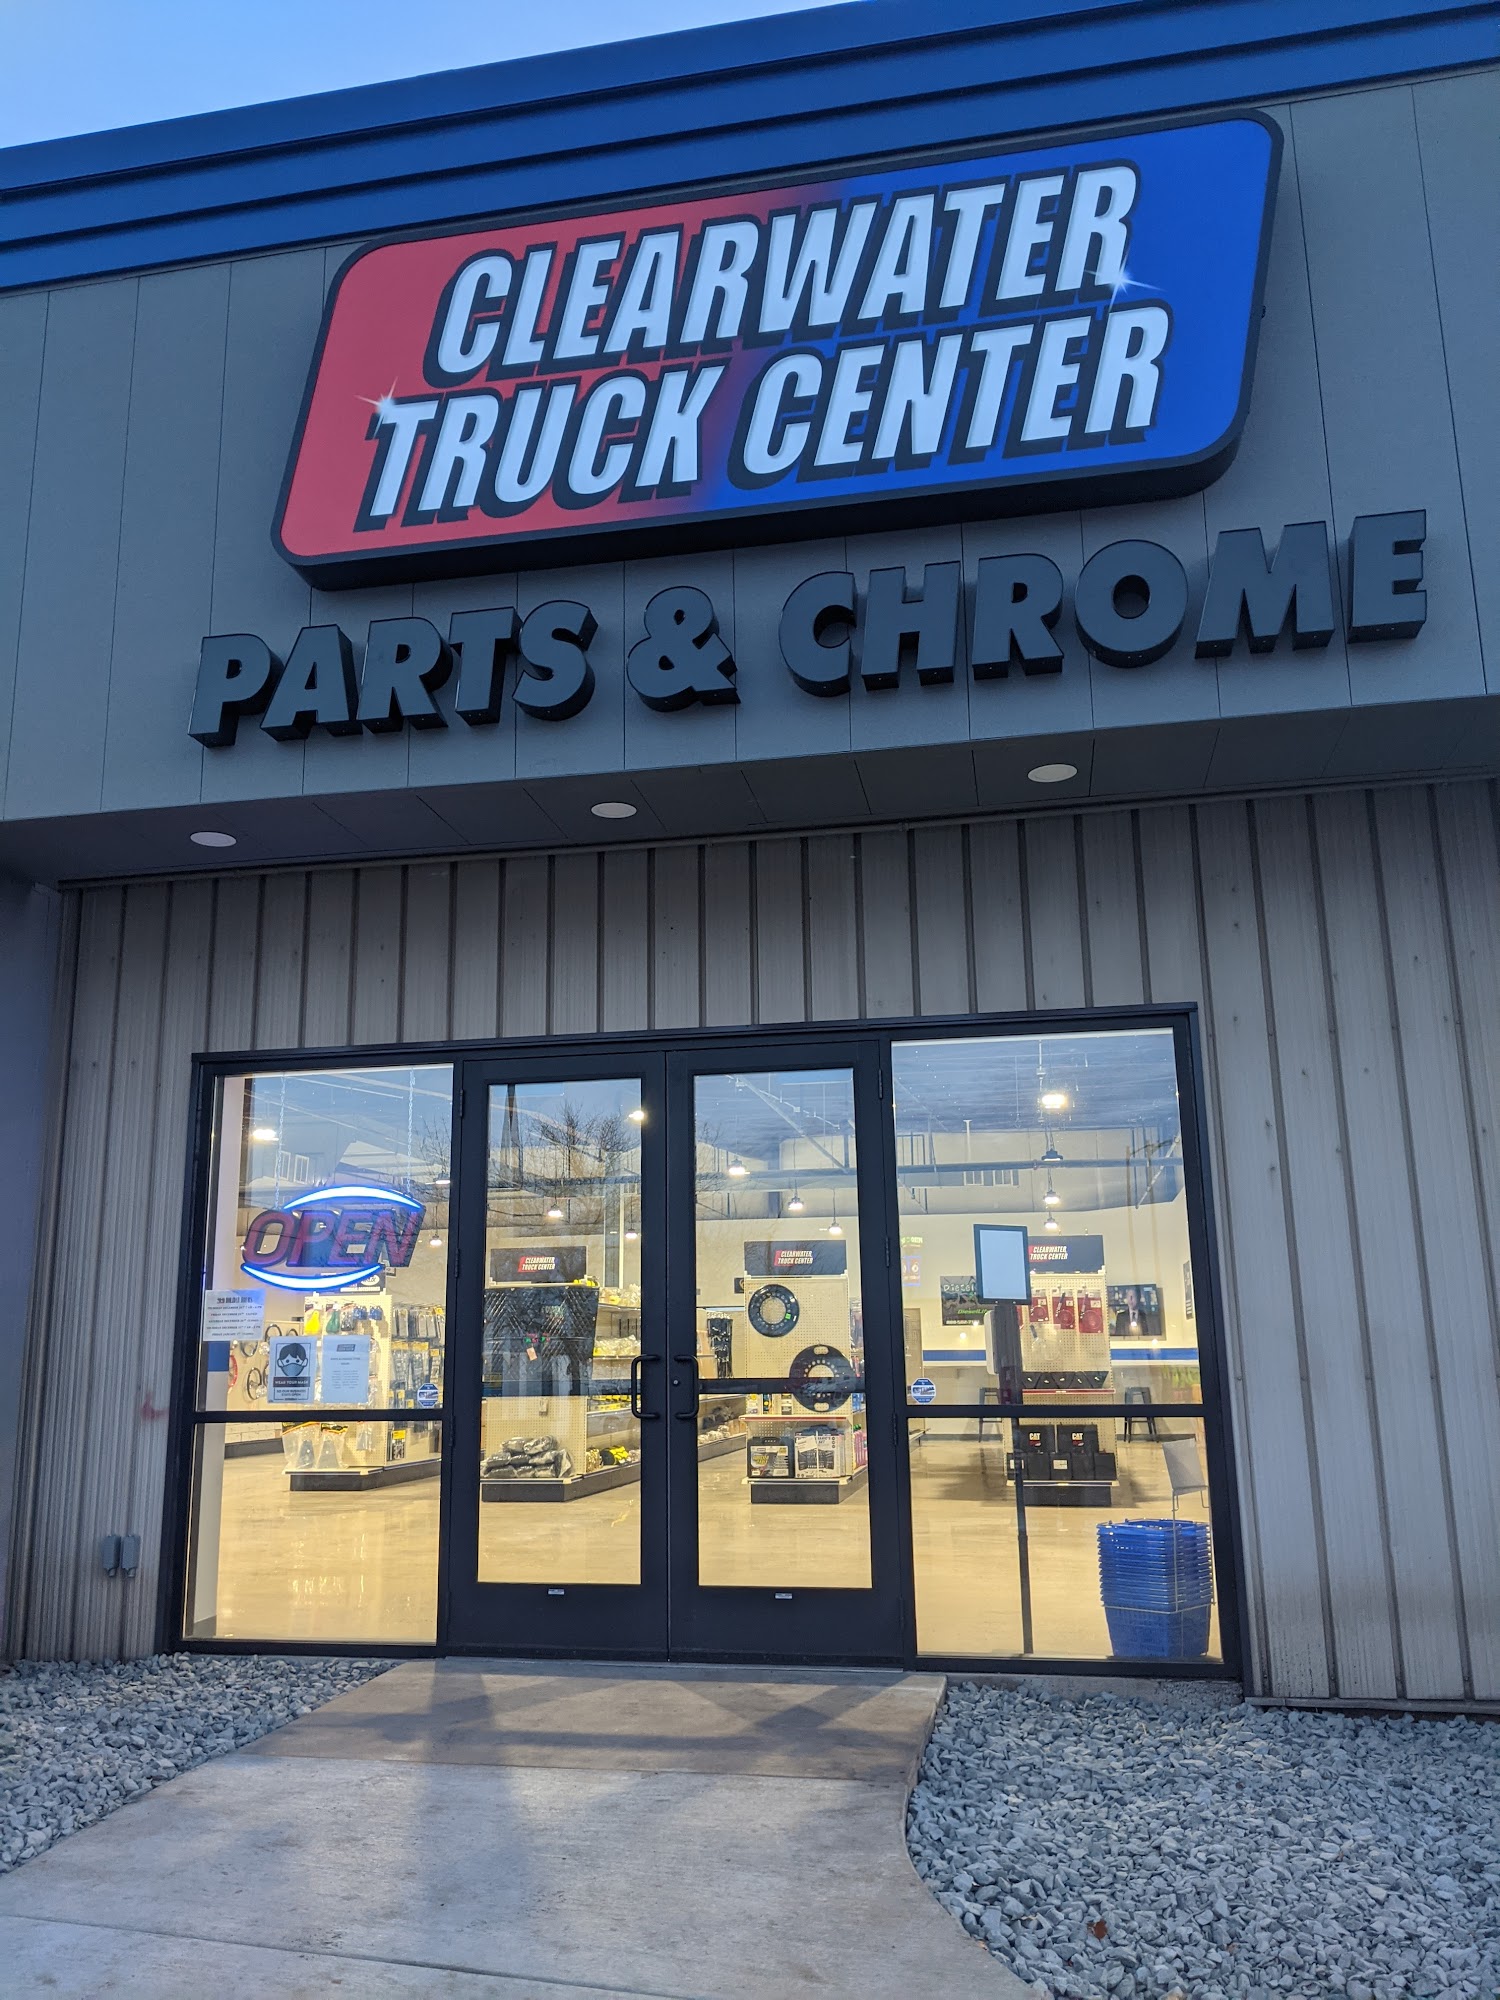 Parts & Chrome Store - Clearwater Truck Center